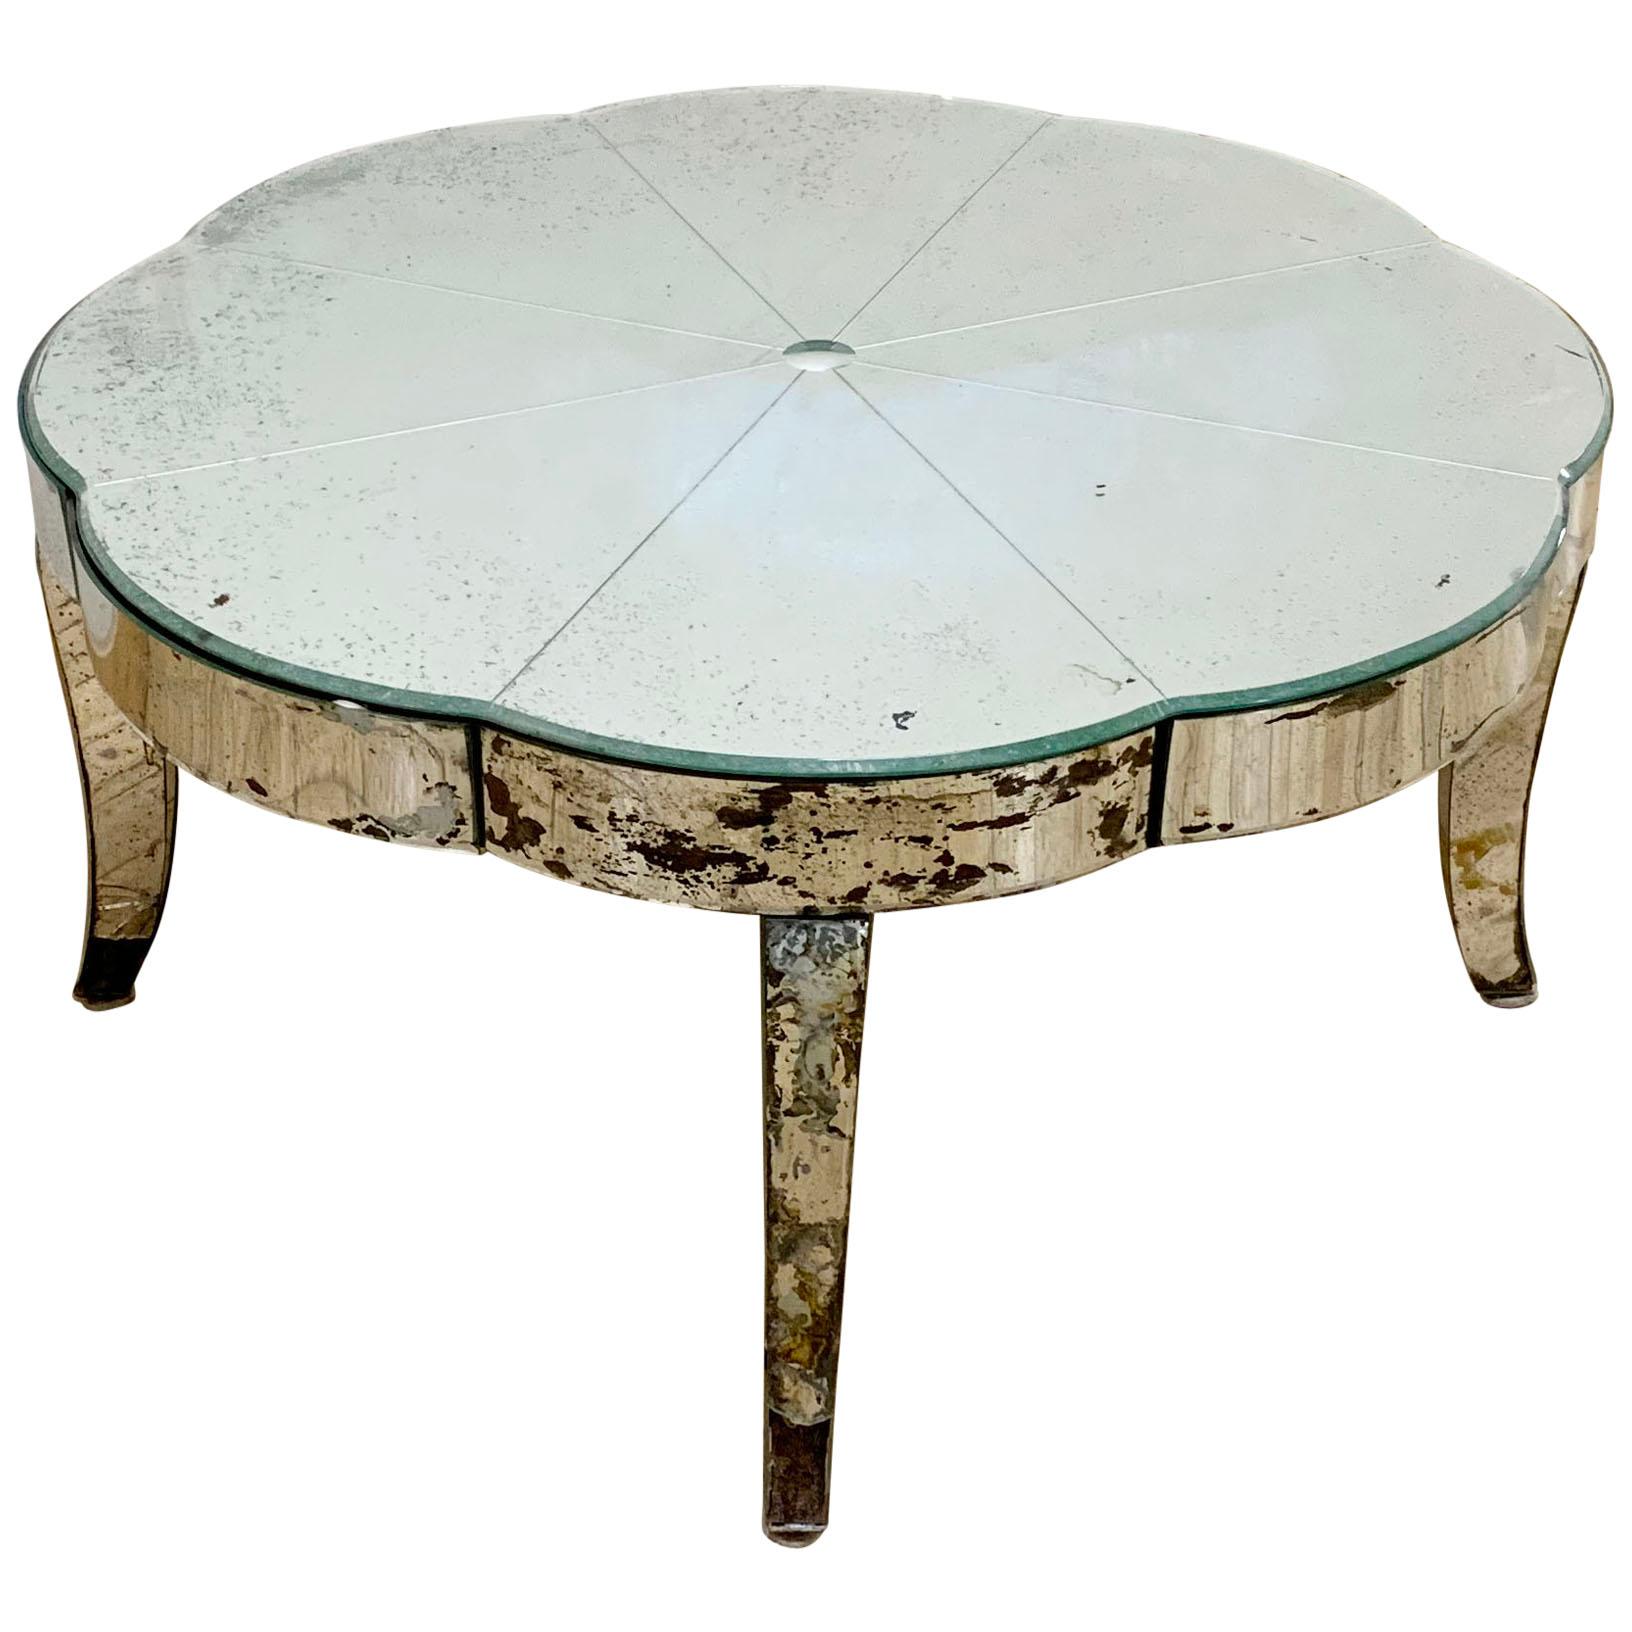 Period French or Italian Deco Mirrored Coffee Table